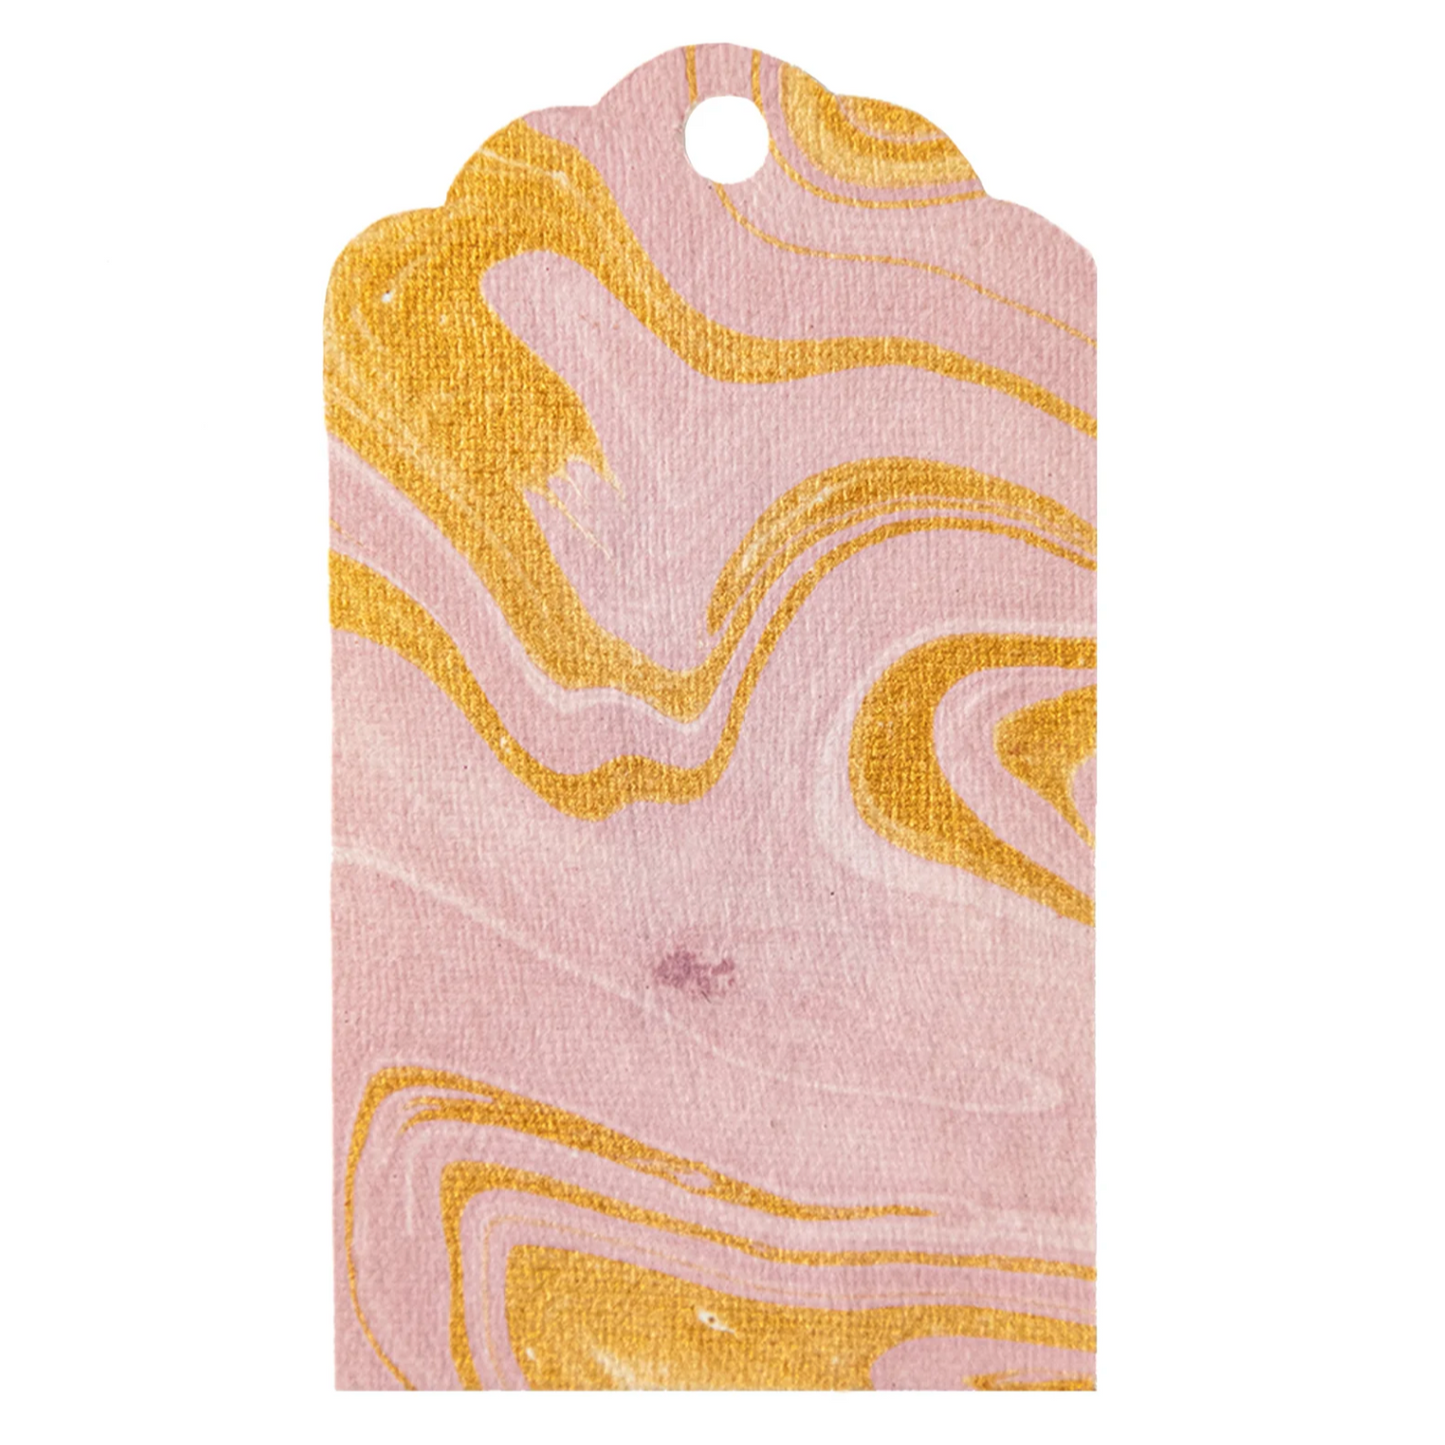 Pink & Gold Vein Marbled Gift Tags